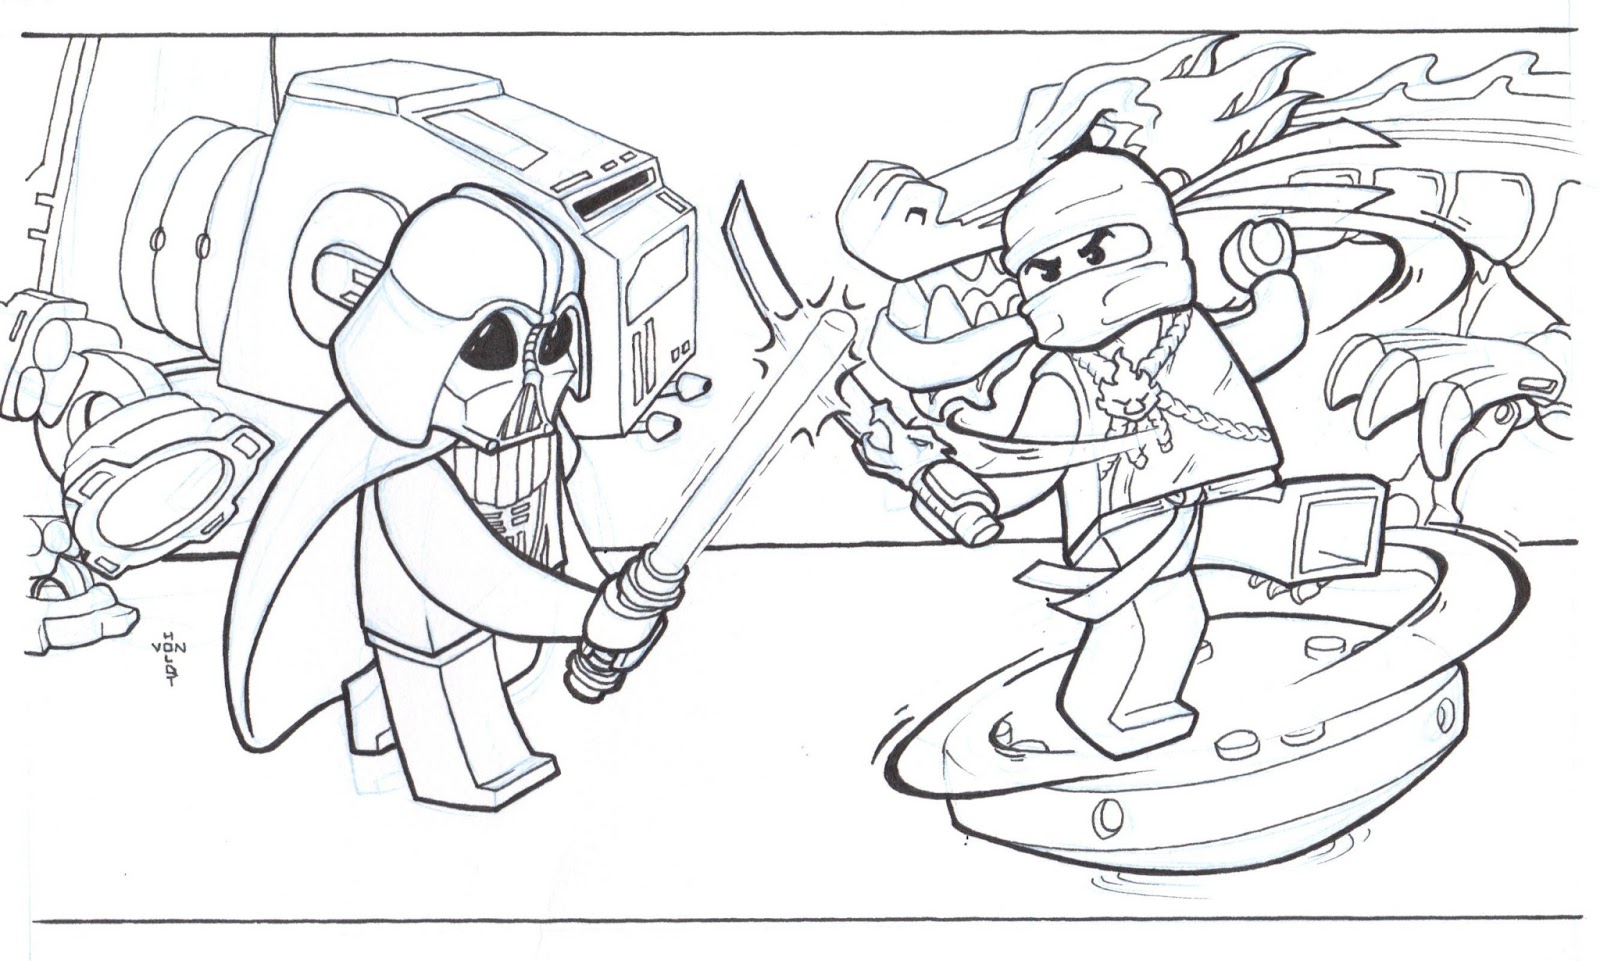 Lego Ninjago Coloring Pages - Free Printable Pictures Coloring Pages